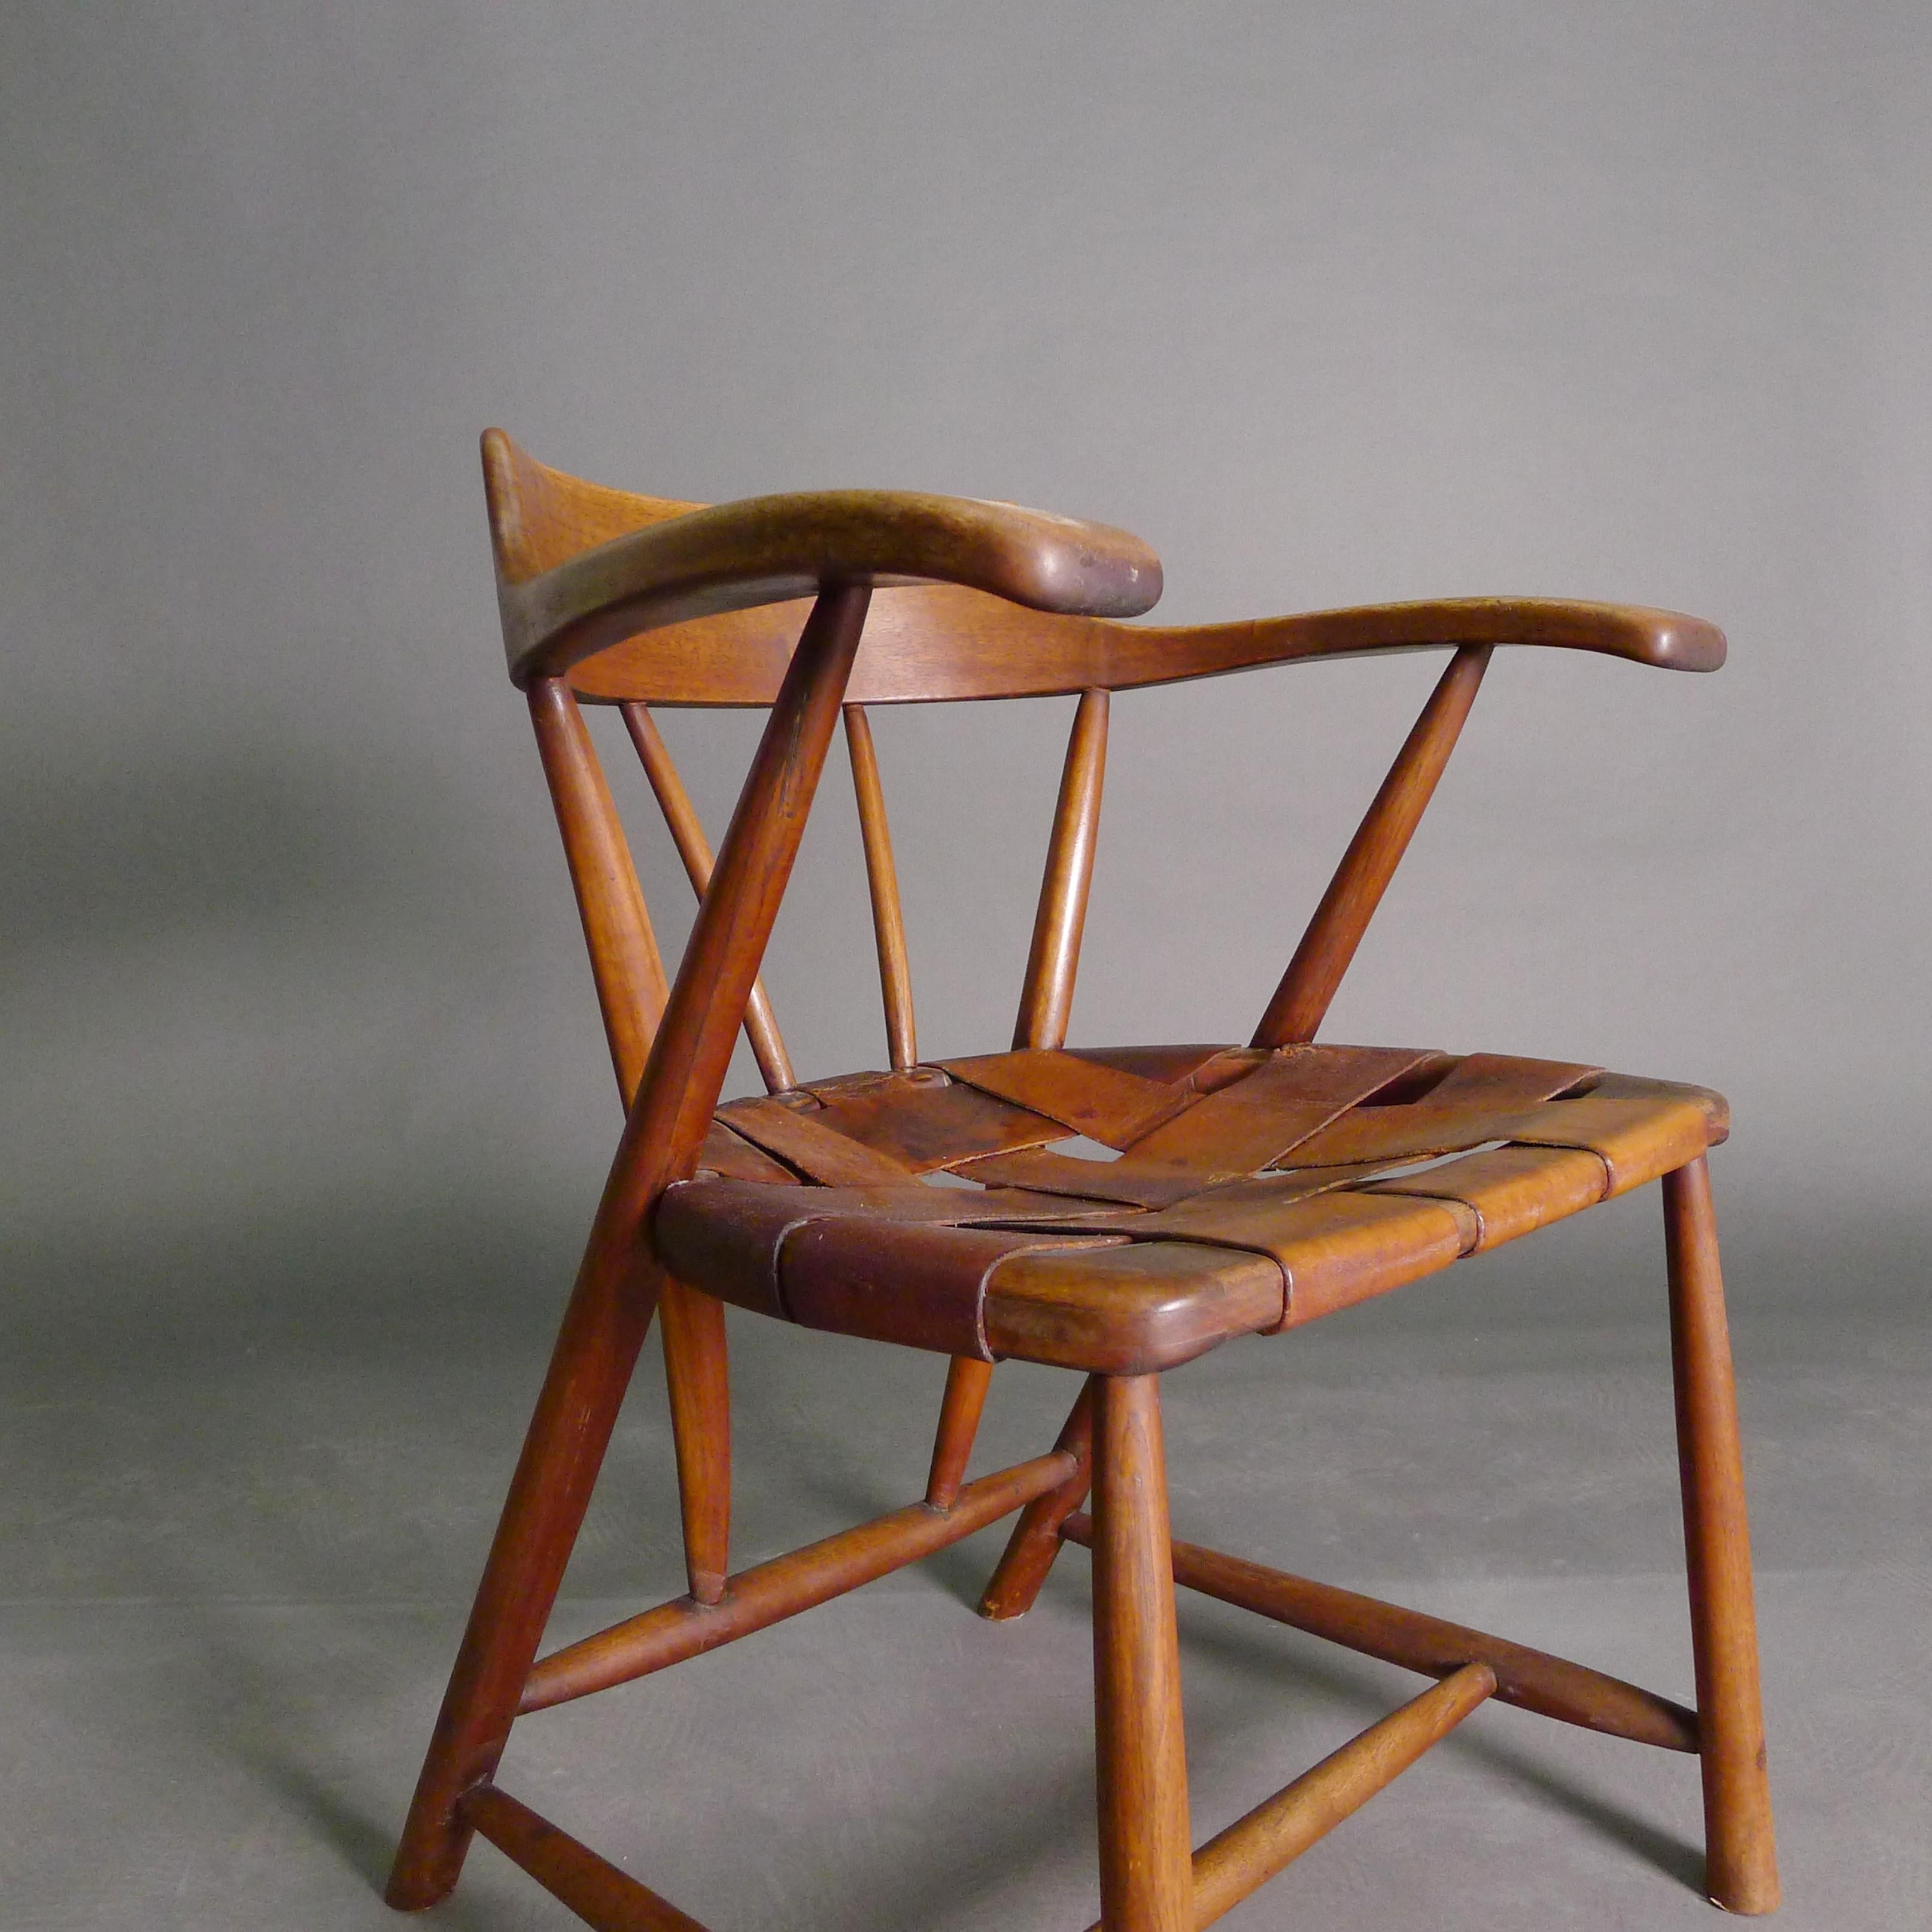 Wharton Esherick, Captains Chair, walnut and leather, initialled and dated 1951 For Sale 4